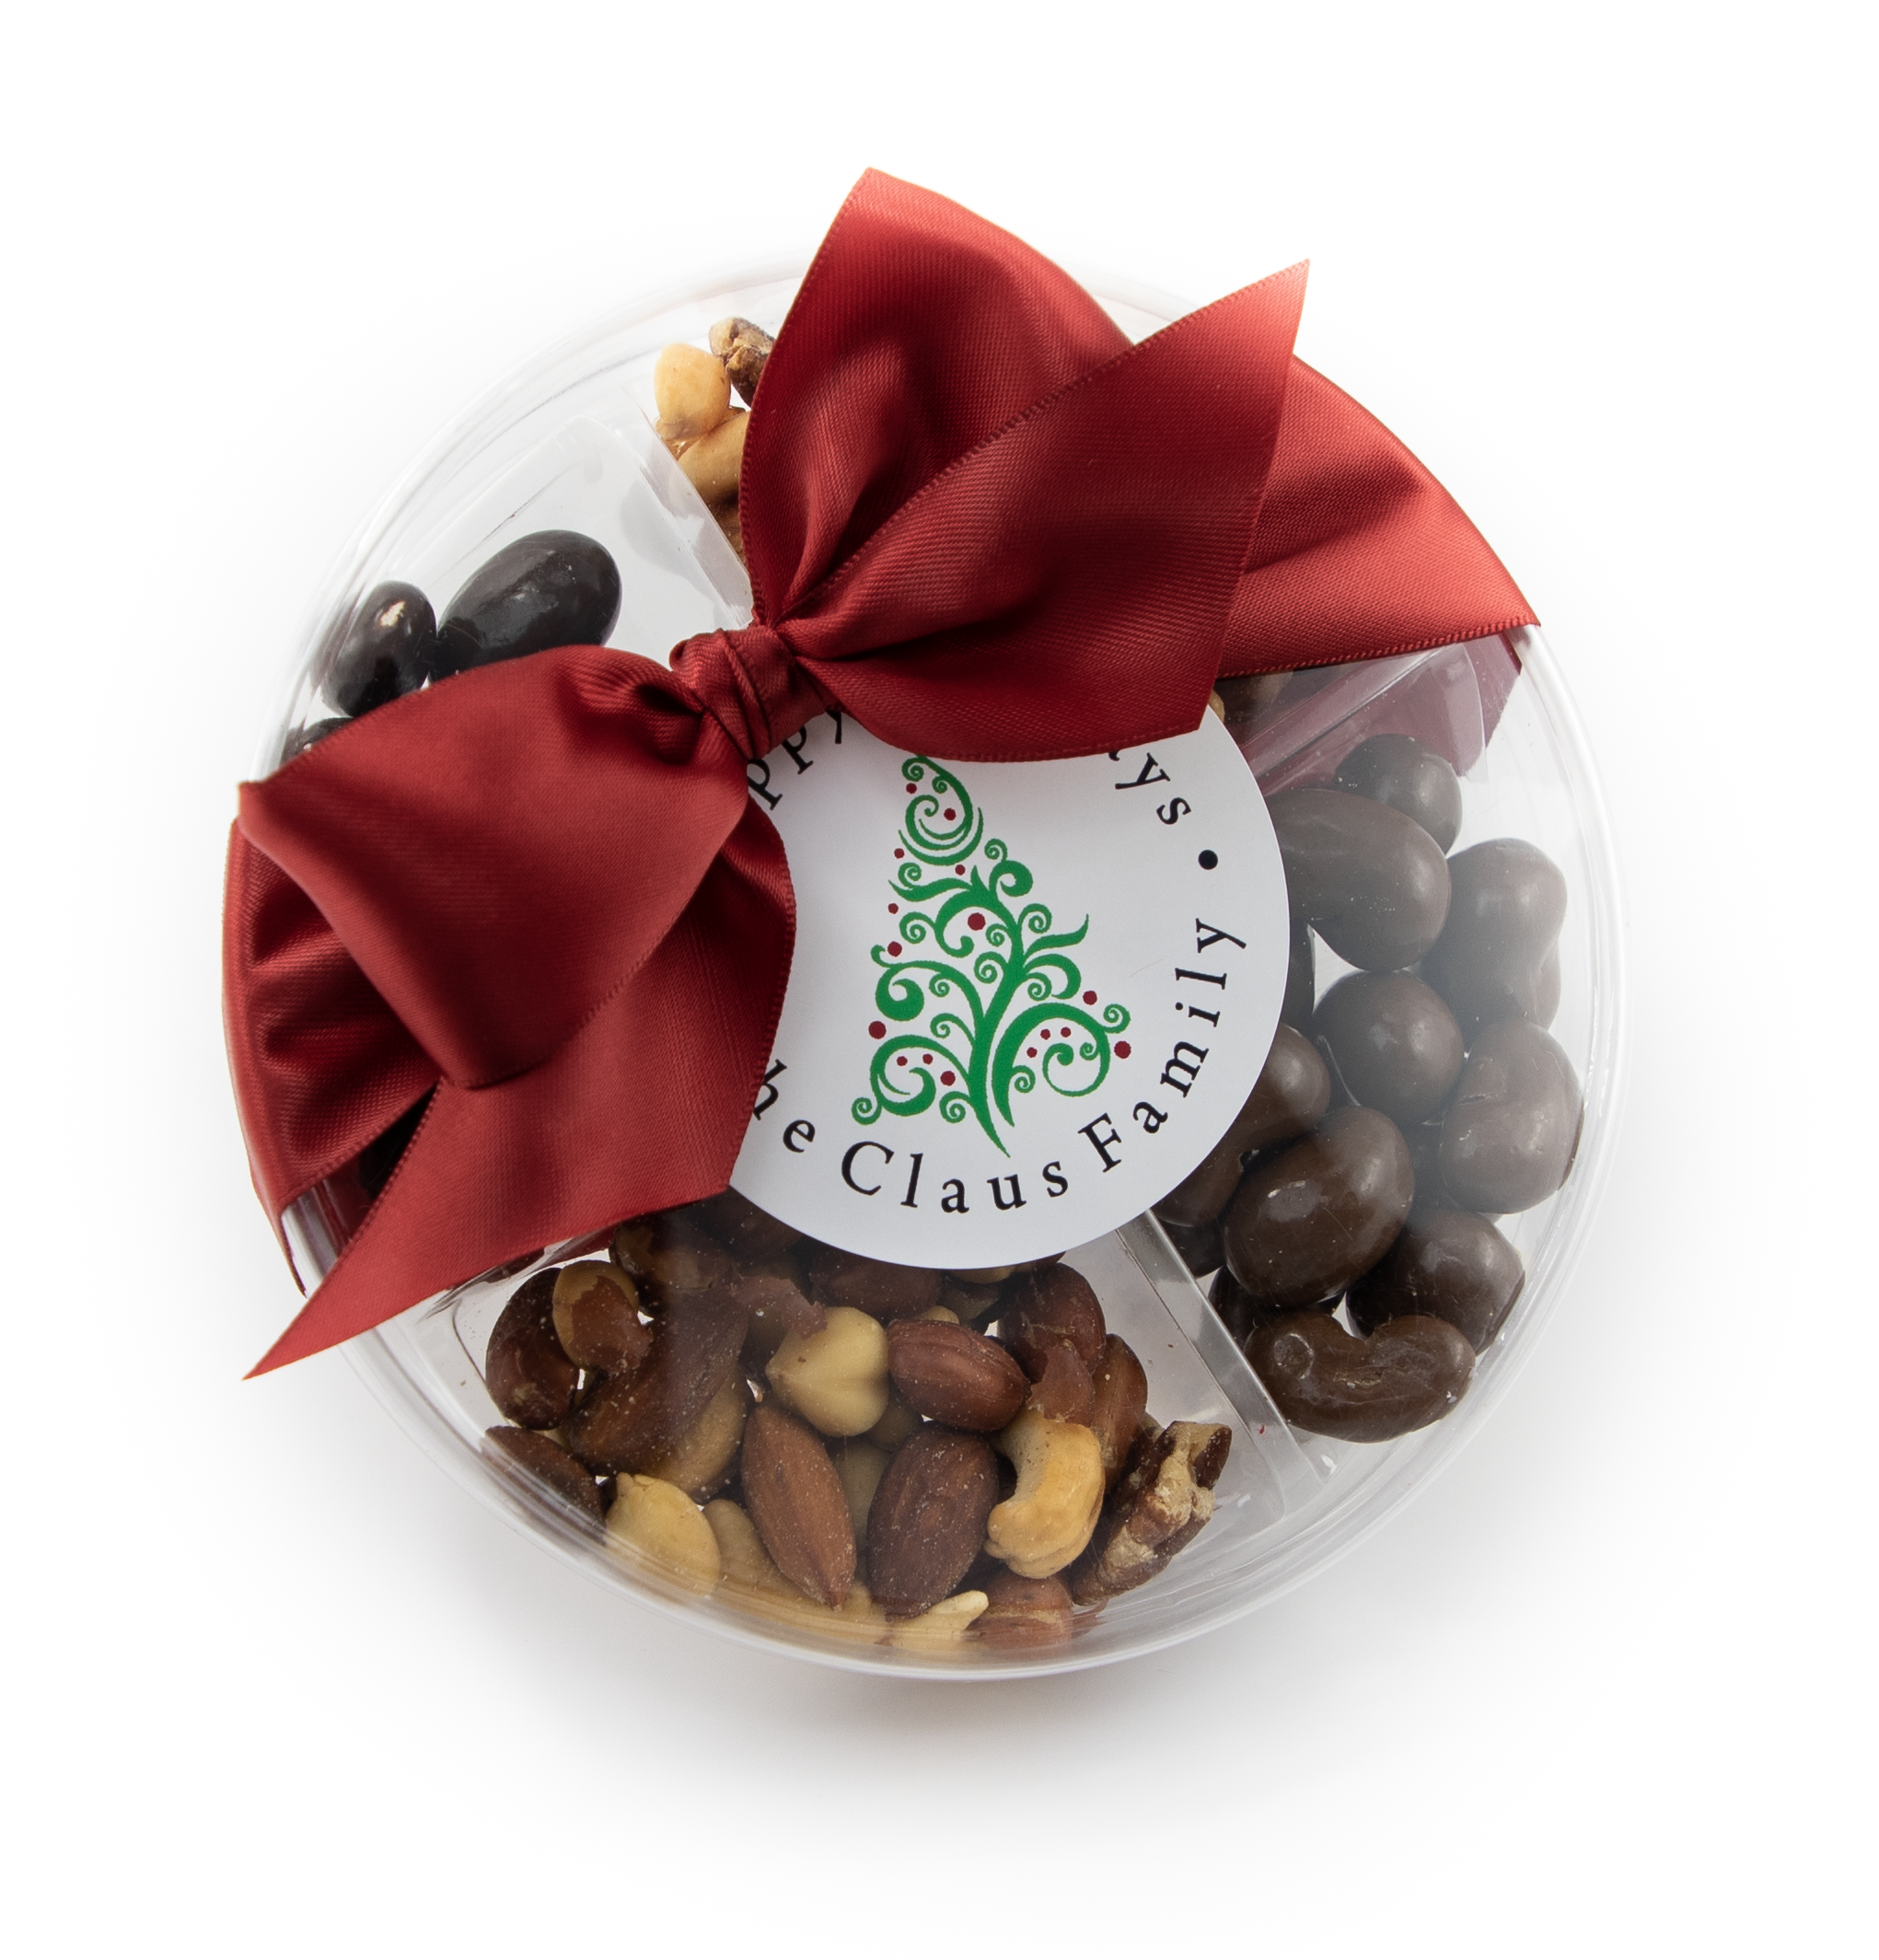 Savory and Chocolate Nuts Executive Gift Box - AG4002 | A Gift Inside